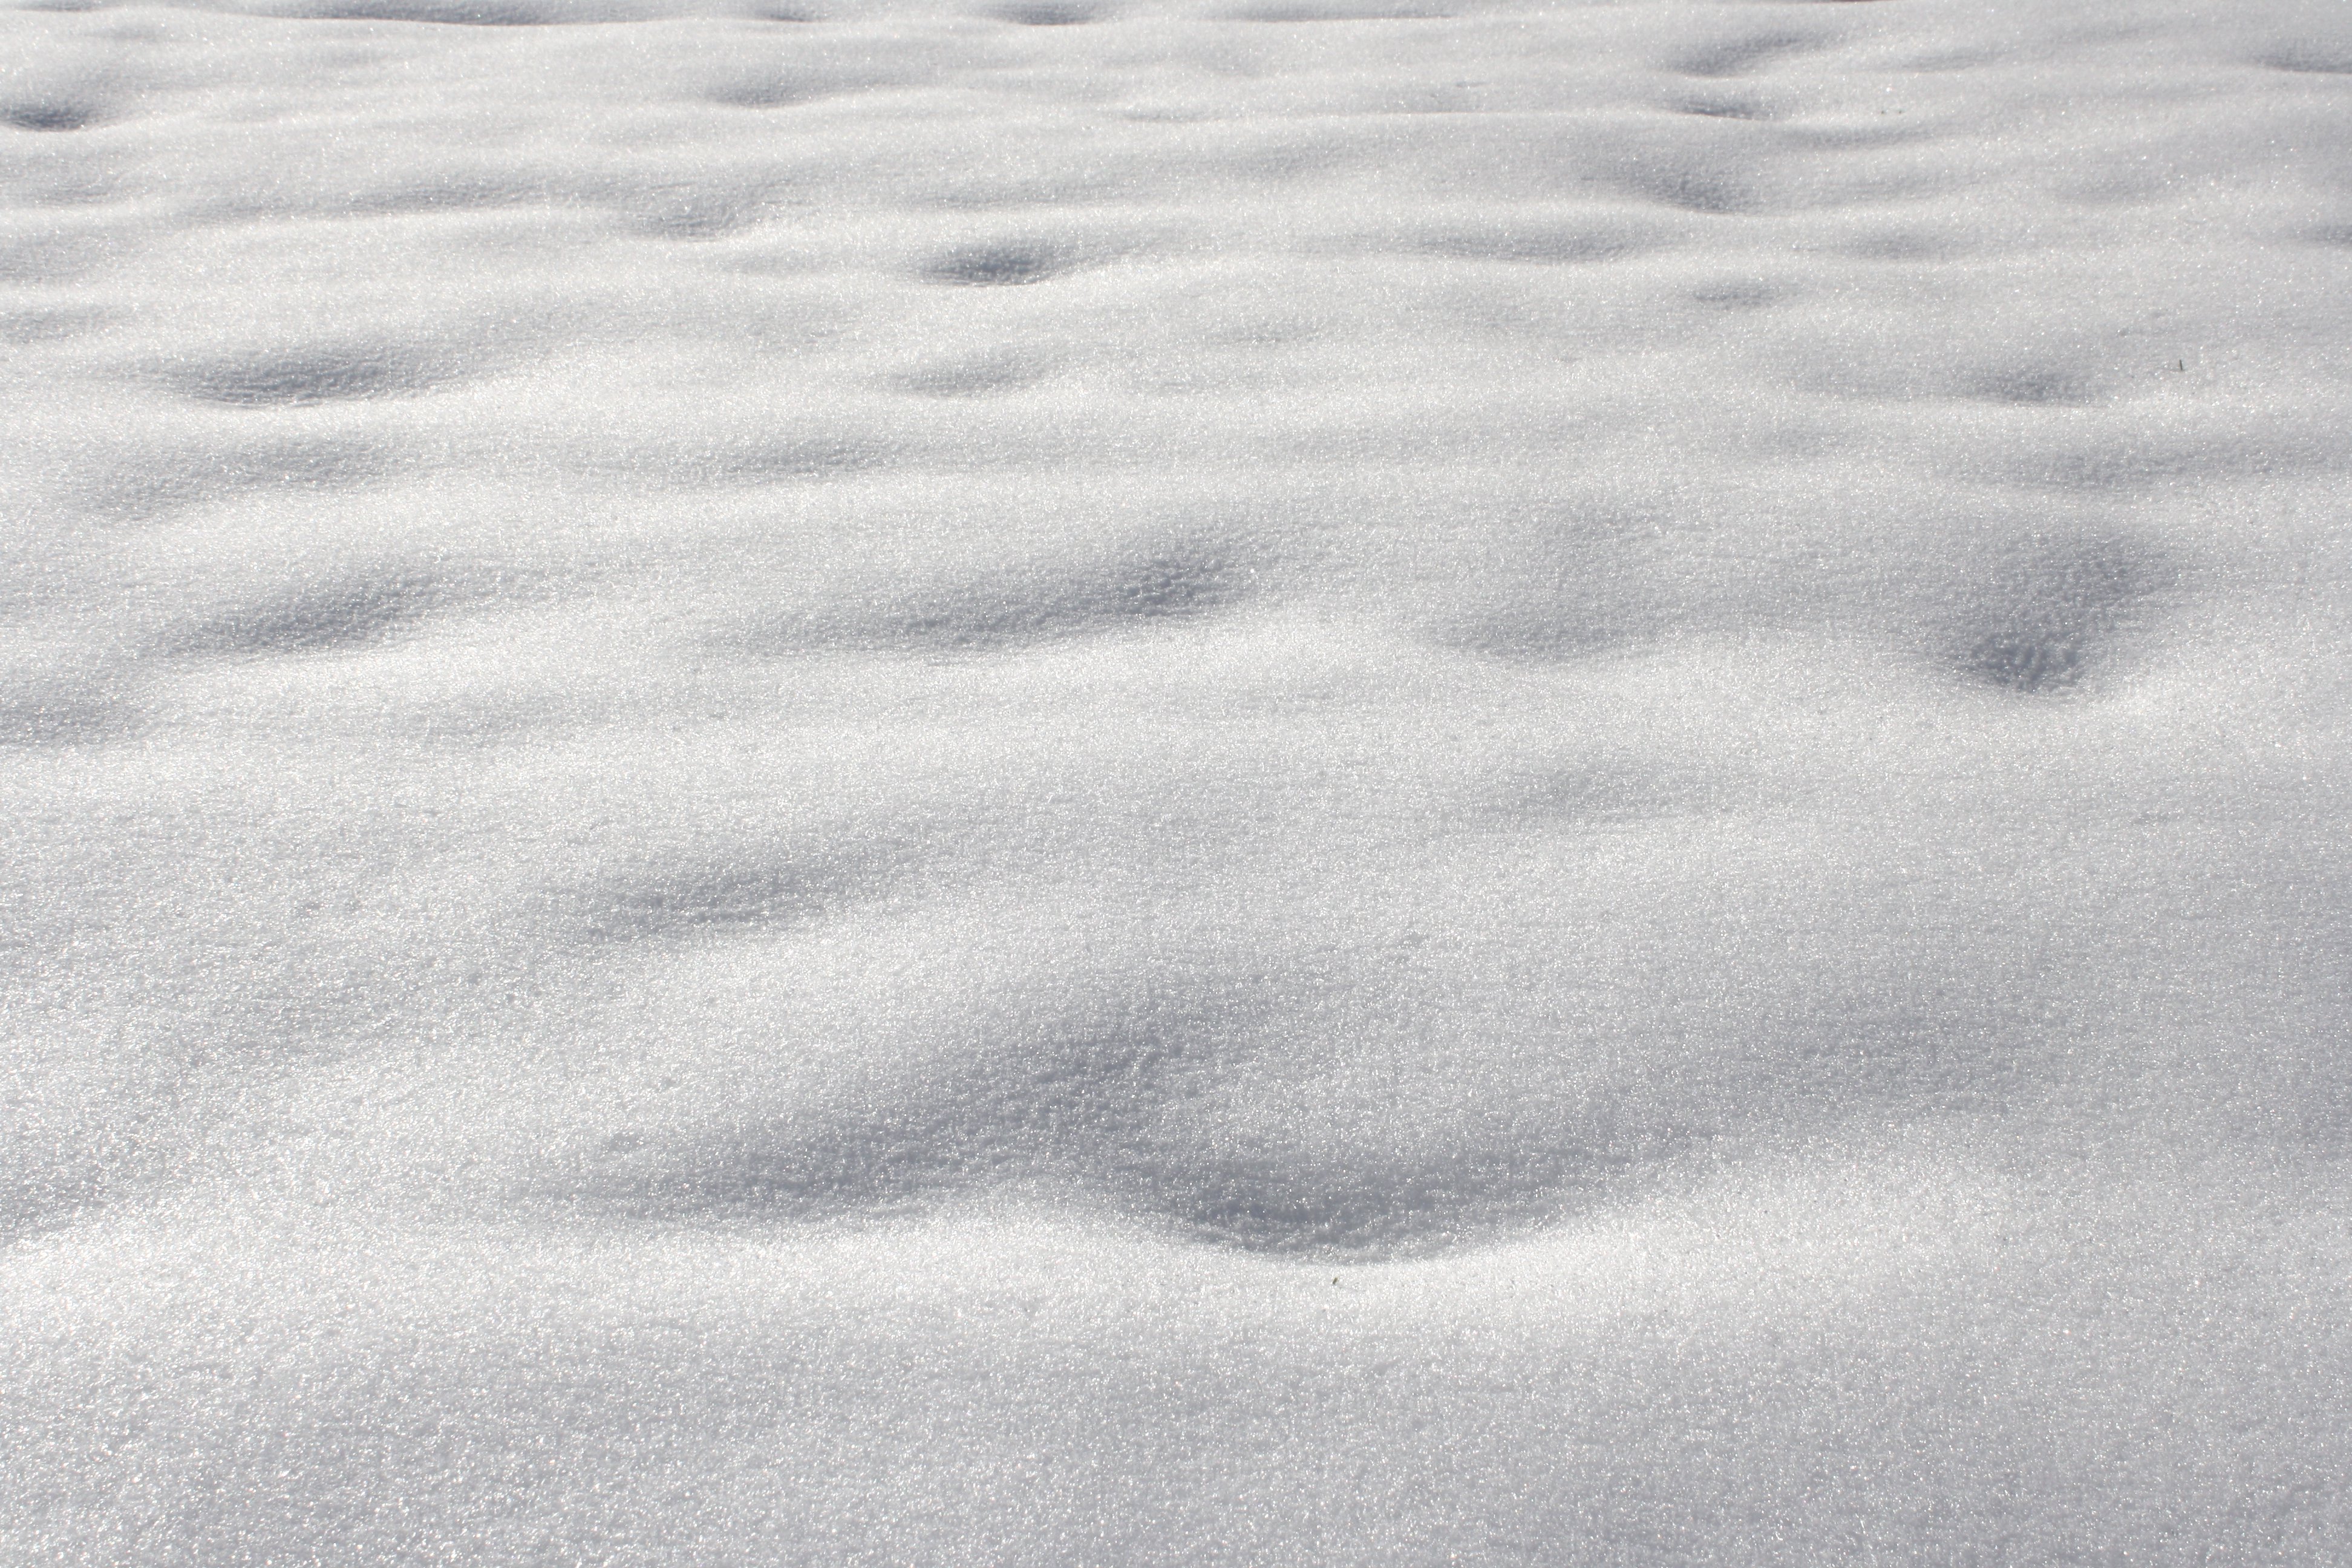 Field Of Dimpled Snow High Resolution Photo Dimensions